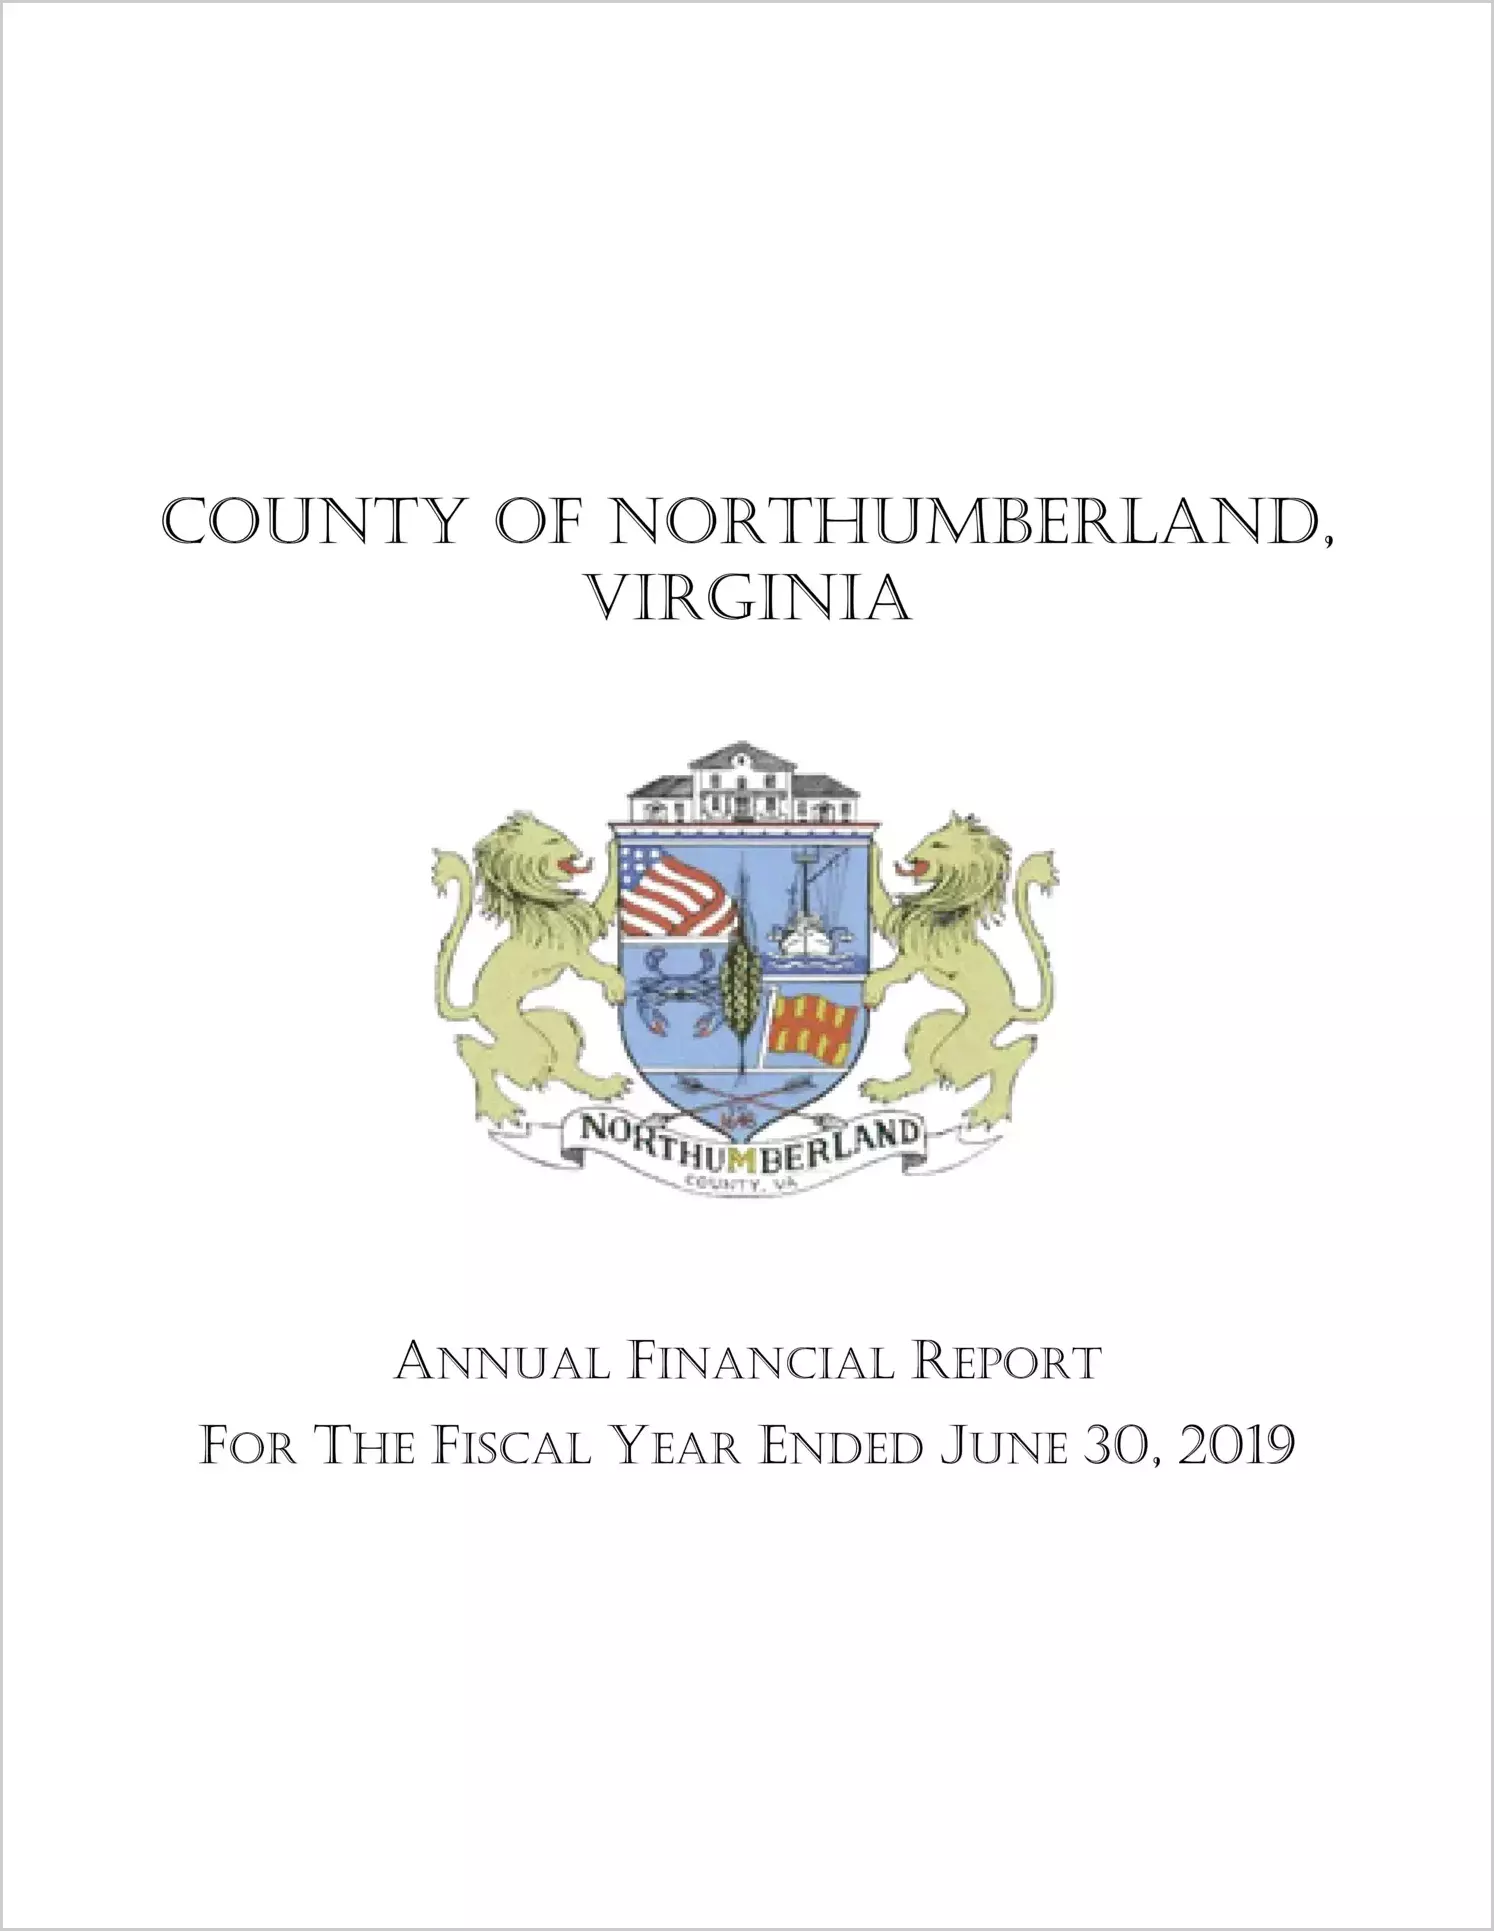 2019 Annual Financial Report for County of Northumberland